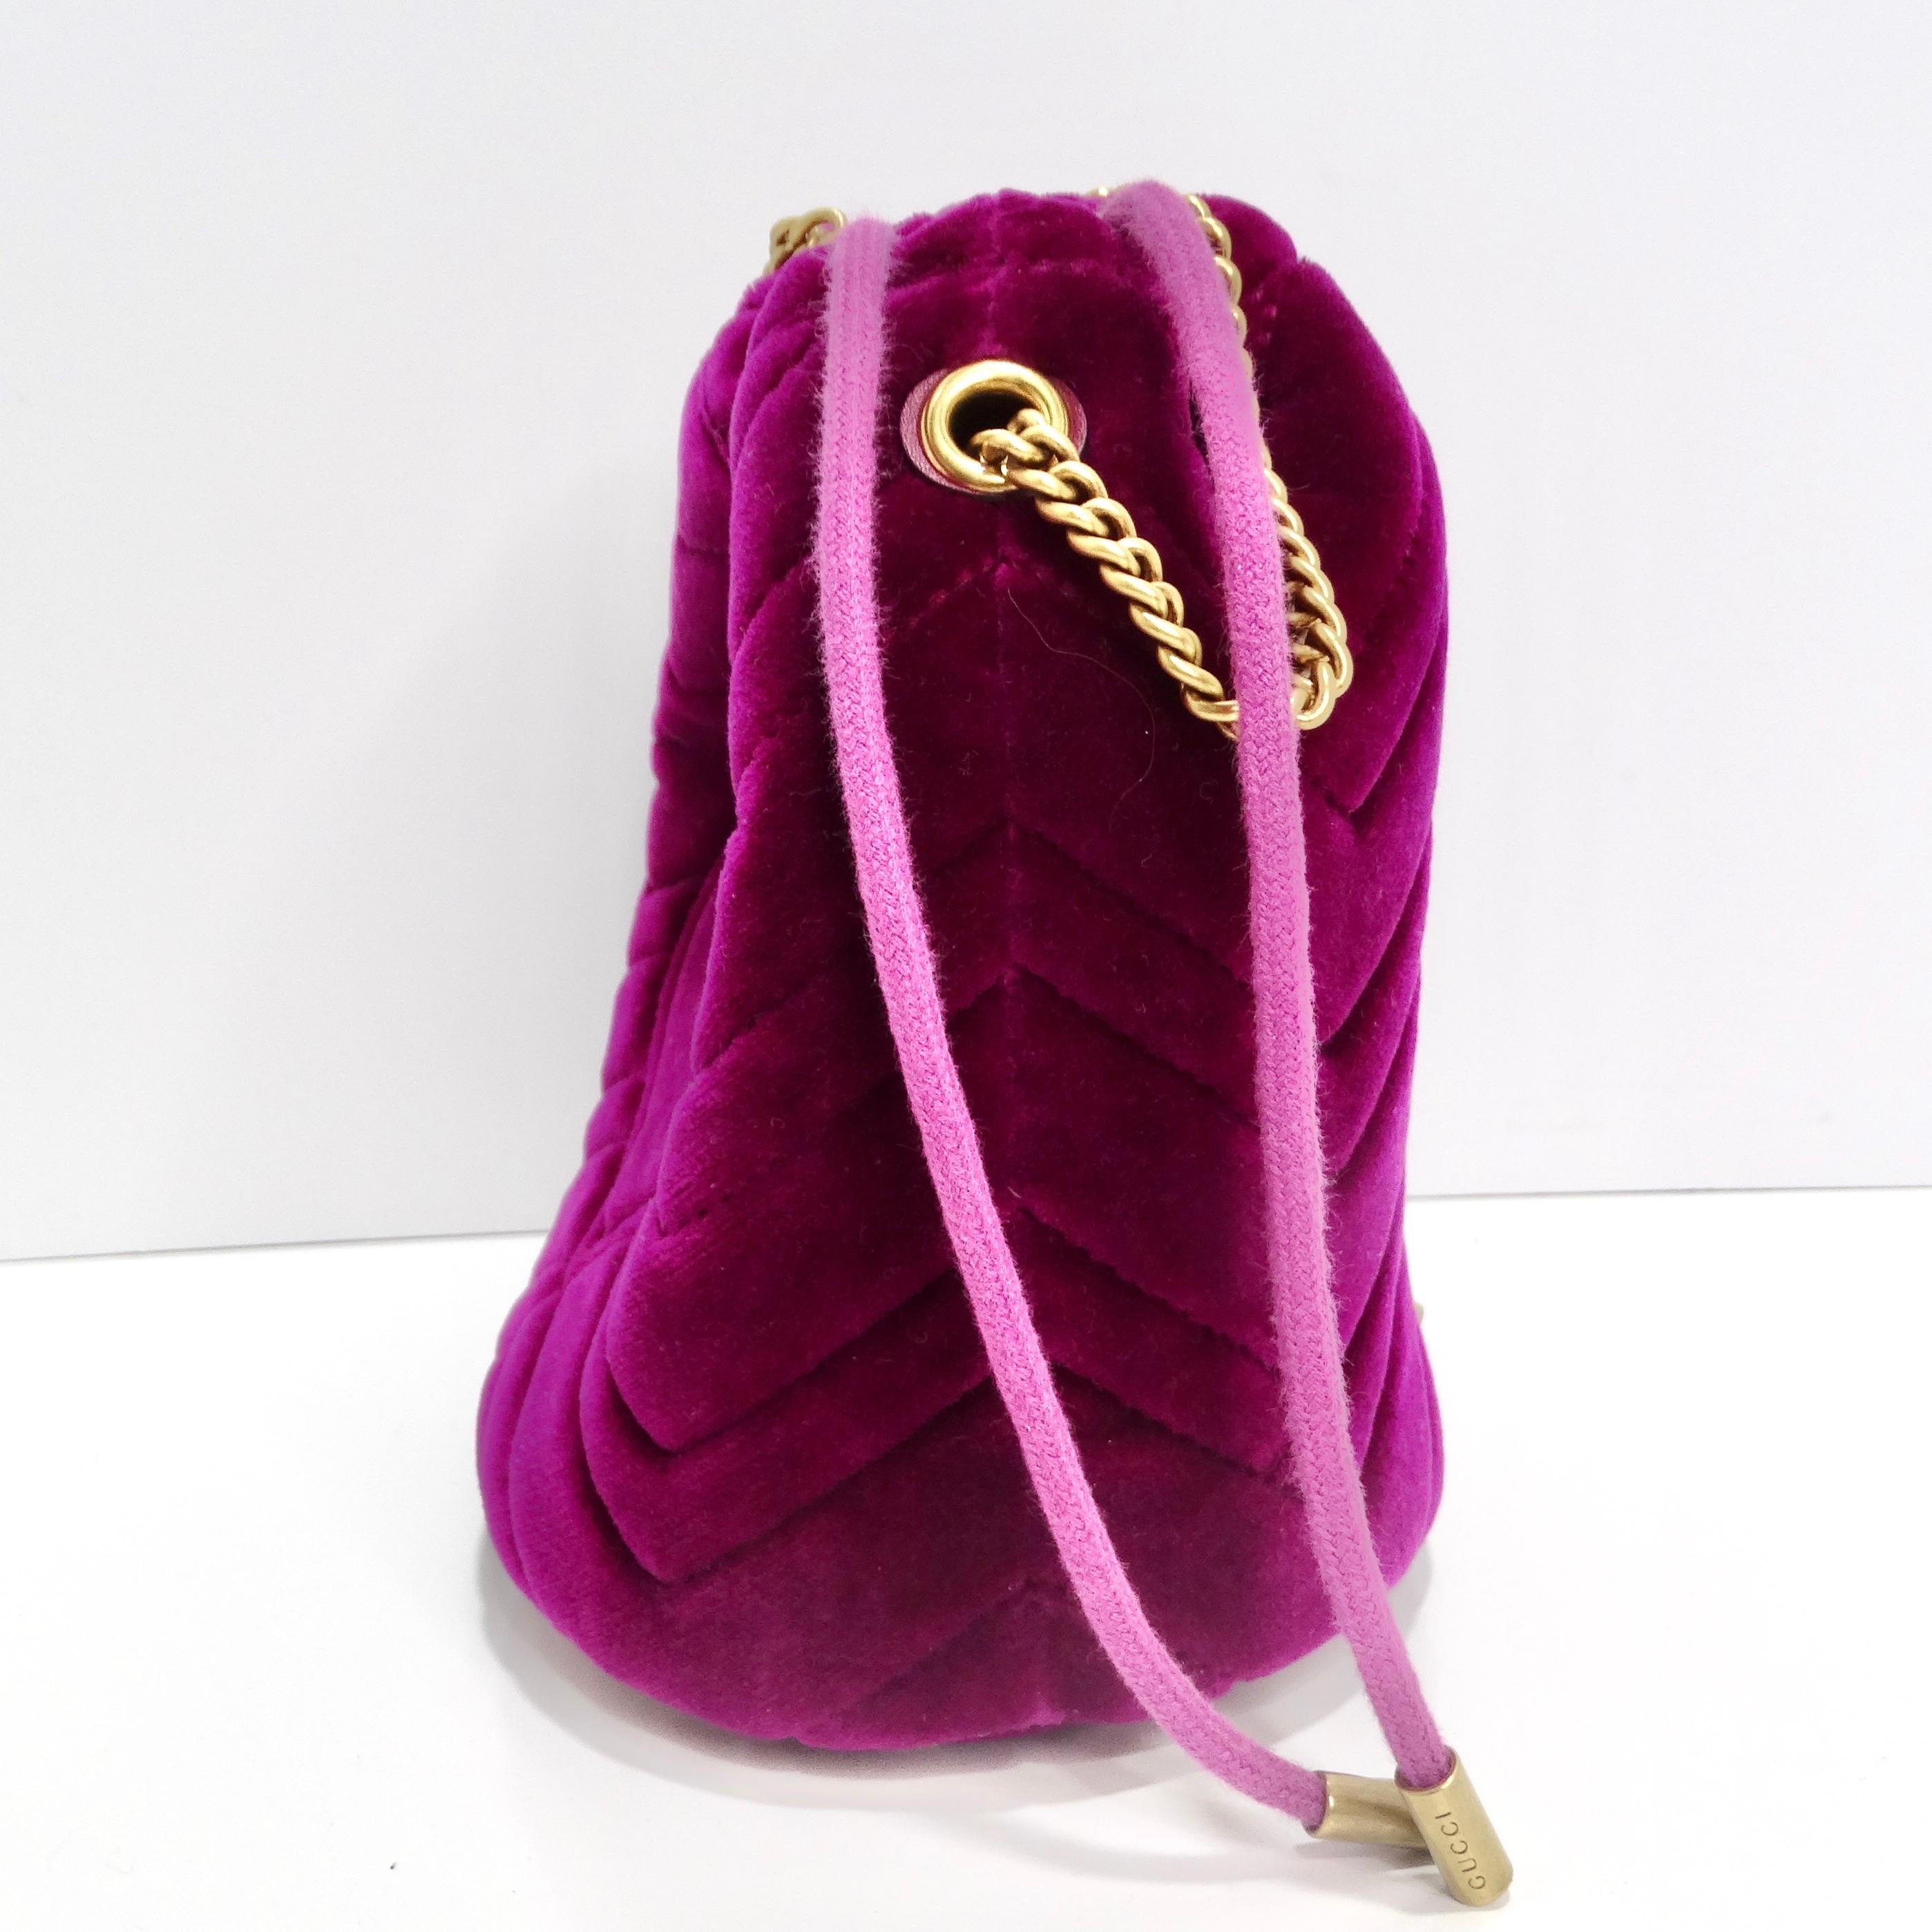 Gucci GG Marmont Mini Velvet Bucket Bag In Excellent Condition For Sale In Scottsdale, AZ